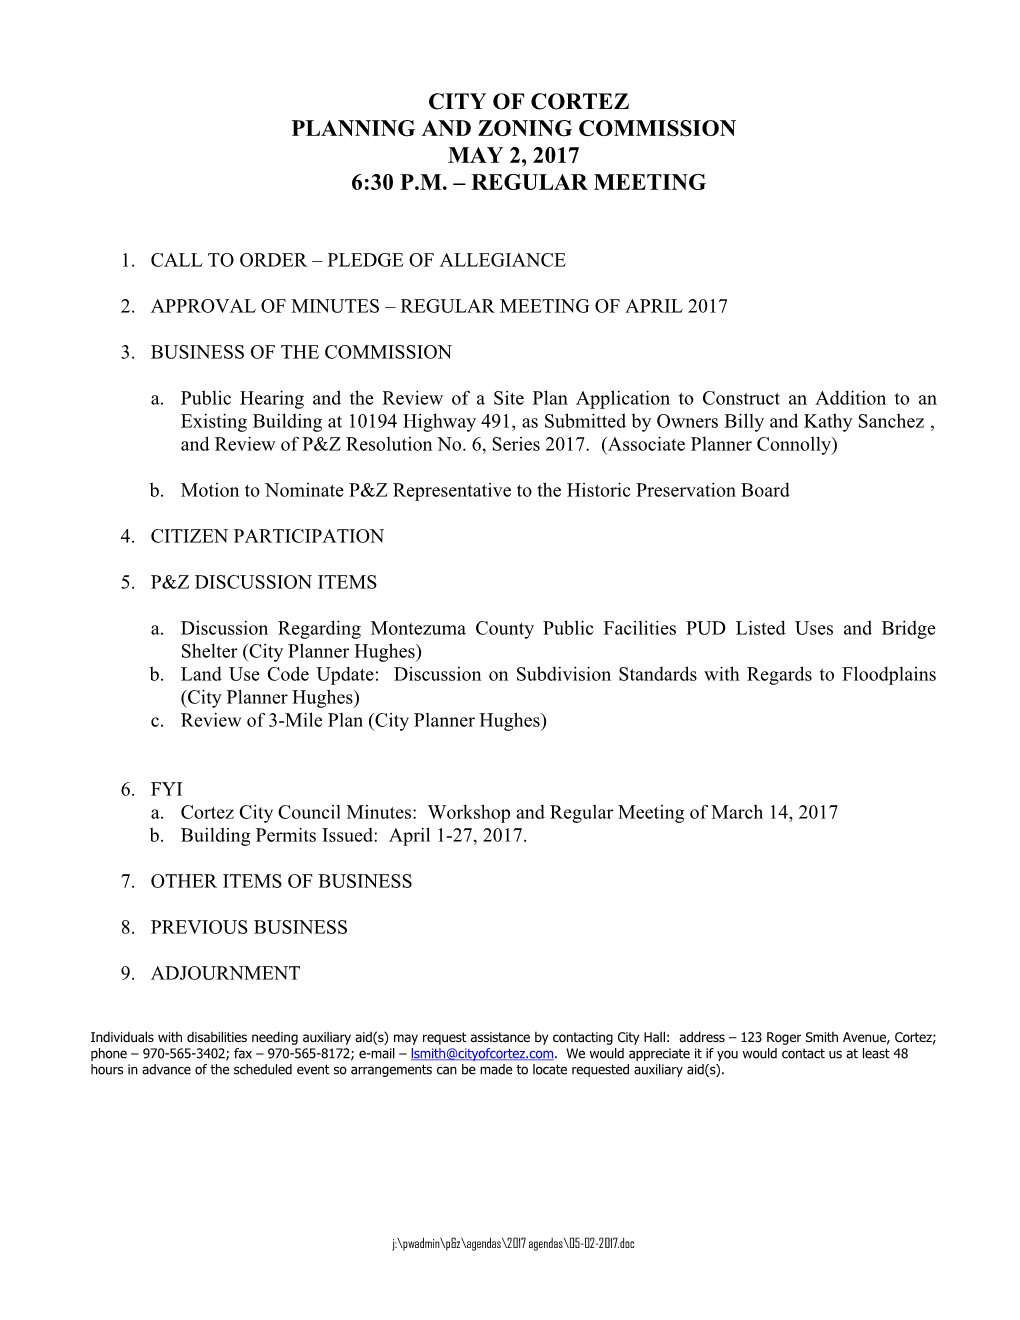 City of Cortez Planning and Zoning Commission May 2, 2017 6:30 P.M